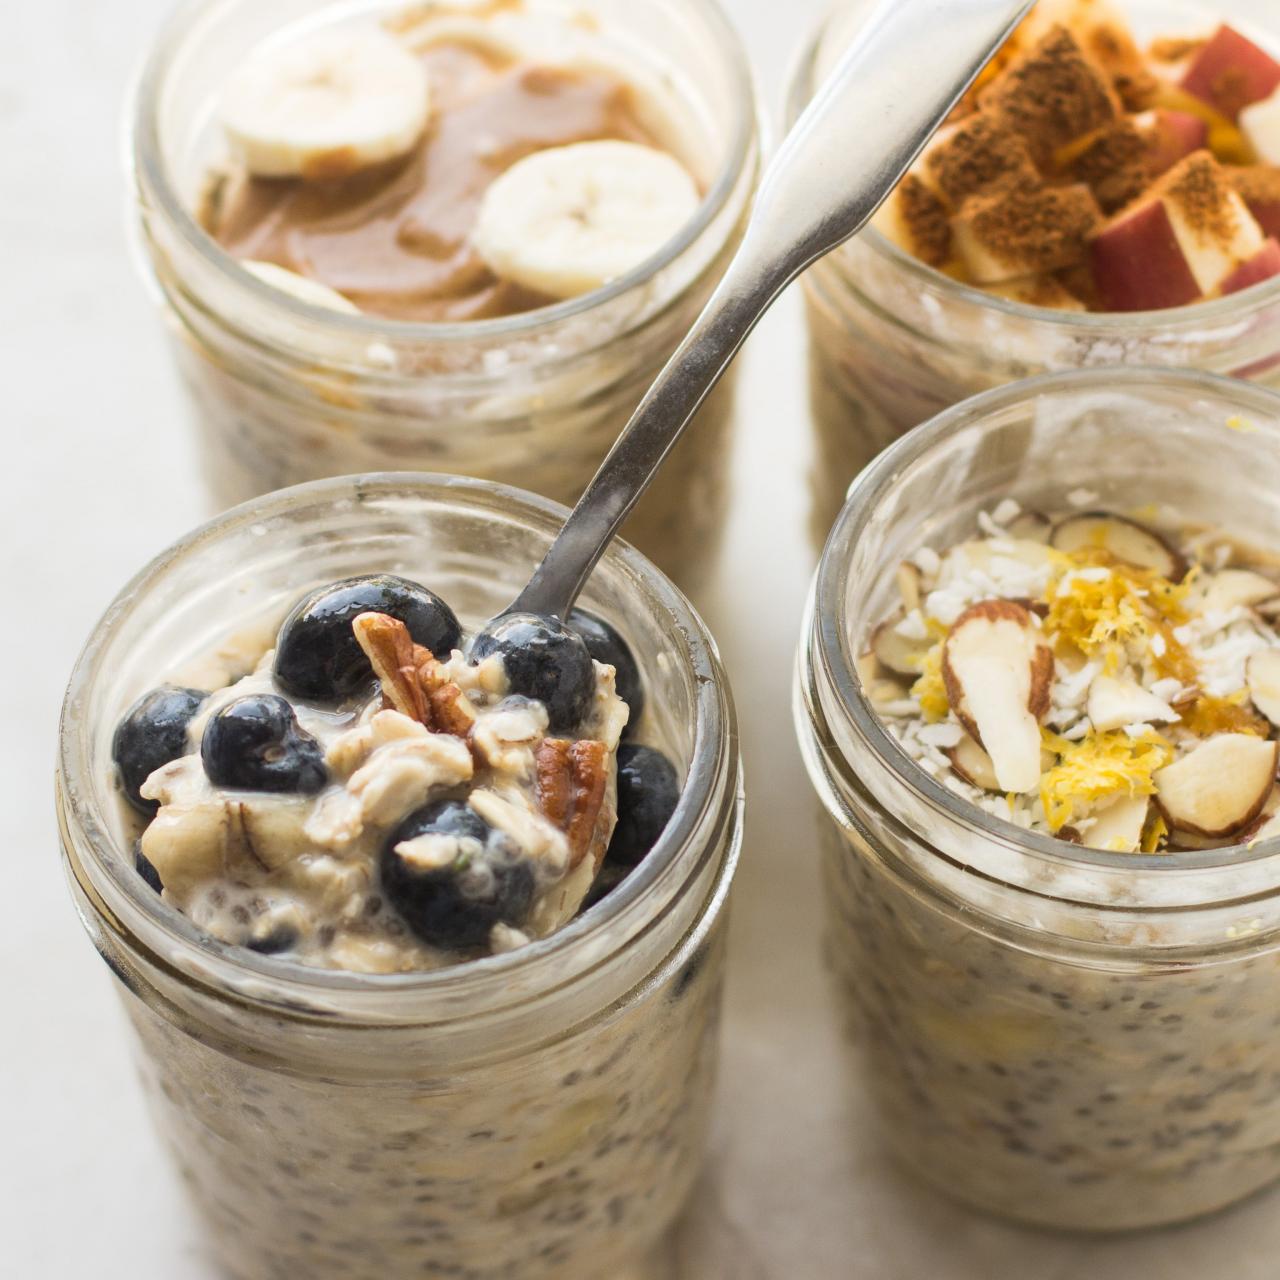 How to Make Healthy Overnight Oats, Overnight Oats Recipe, Min Kwon,  M.S., R.D.